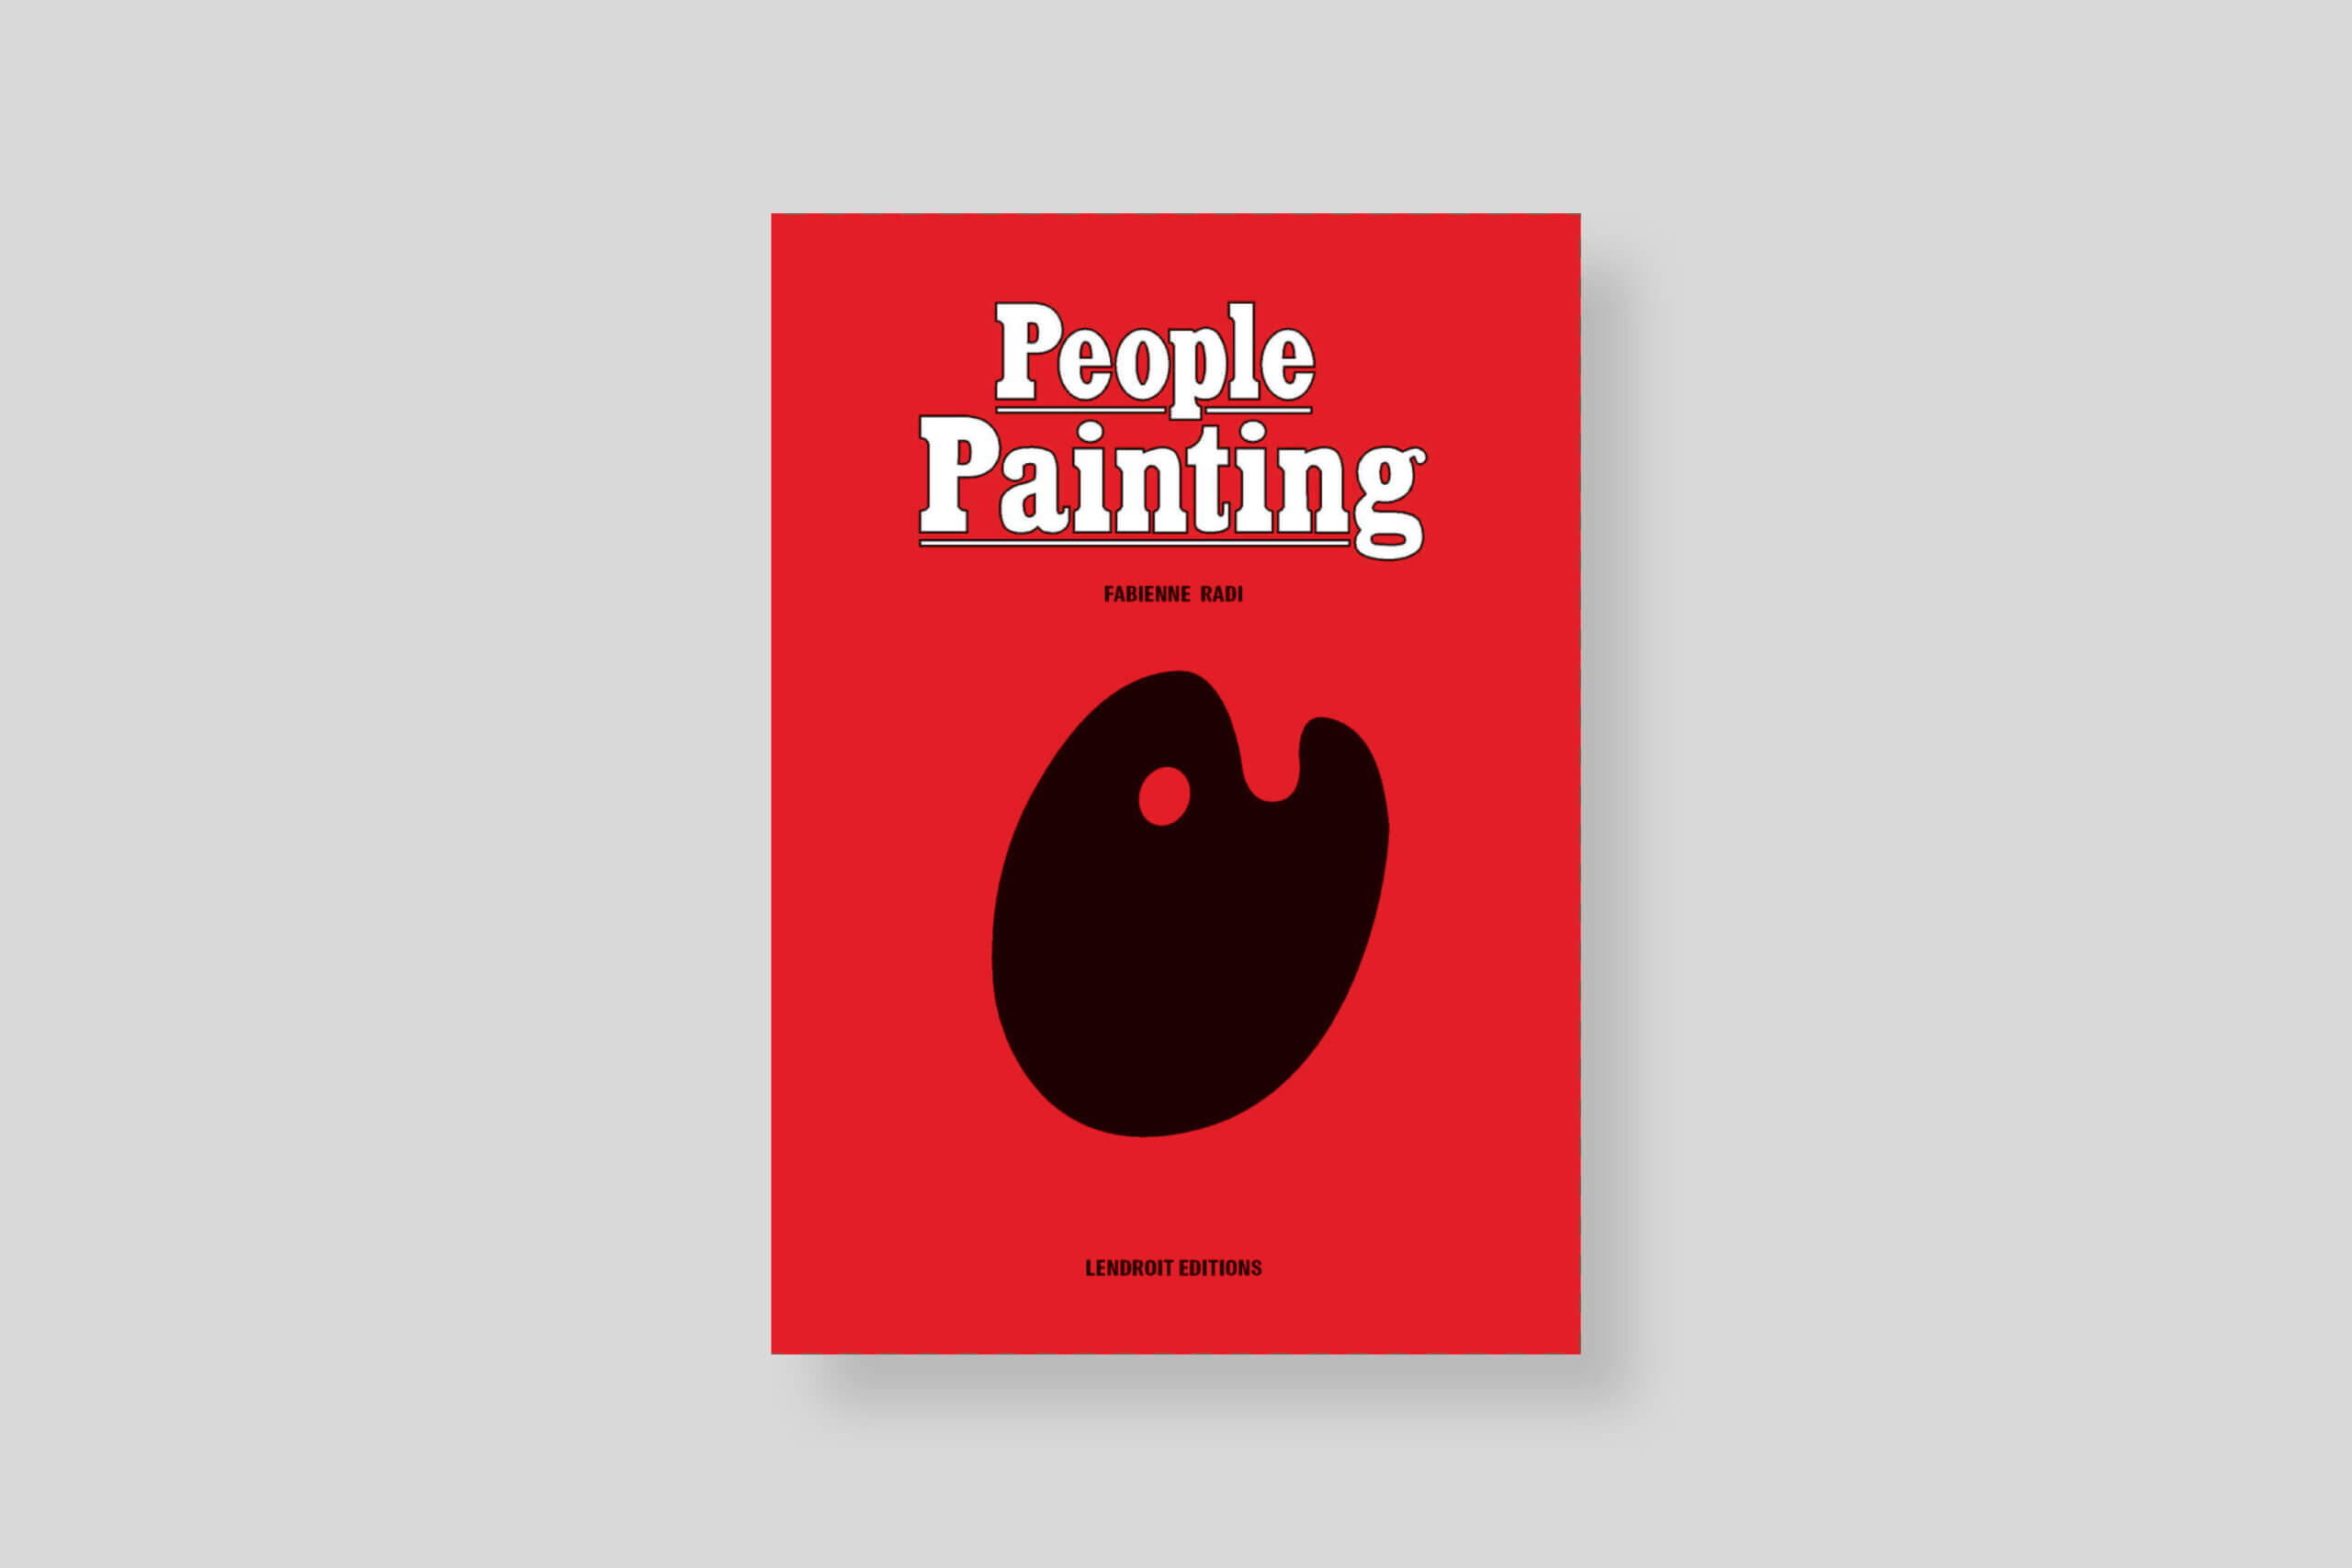 people-painting-mad-lendroit-editions-cover